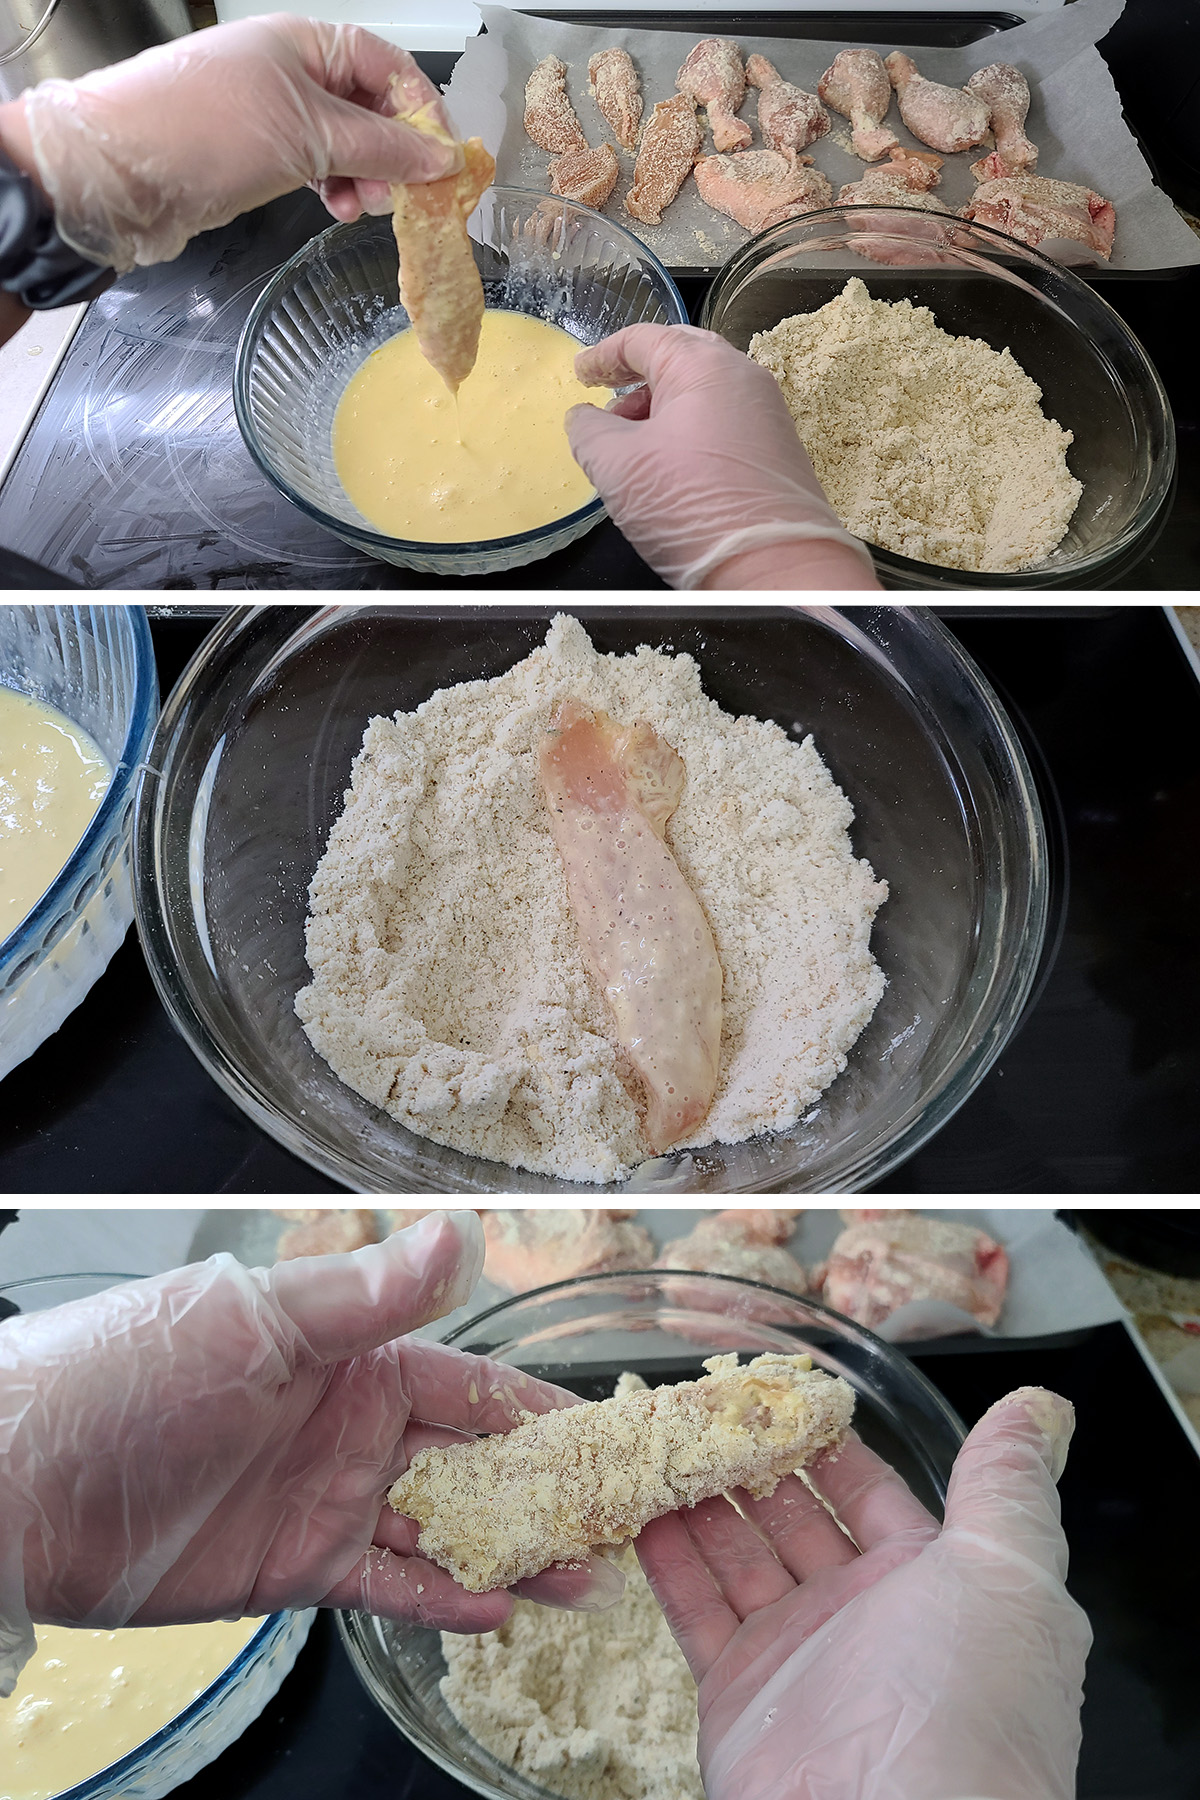 A 3 part image showing chicken being dipped in egg mixture, then breading.